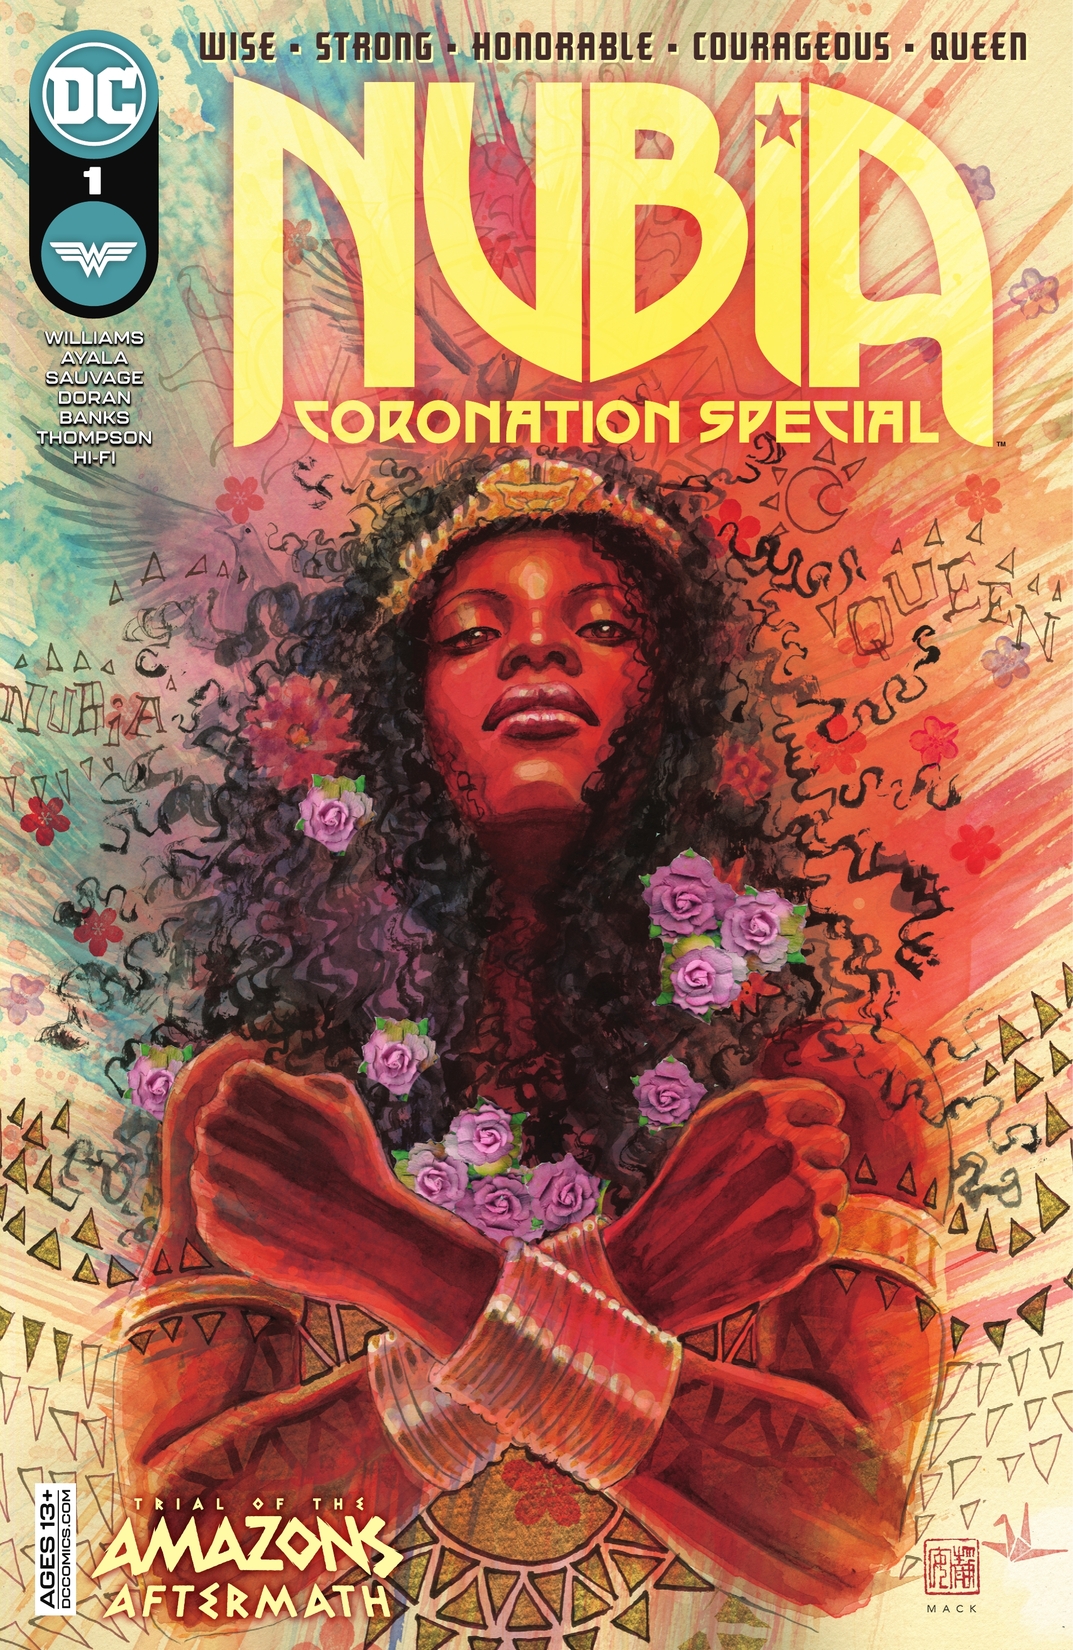 Nubia: Coronation Special #1 preview images